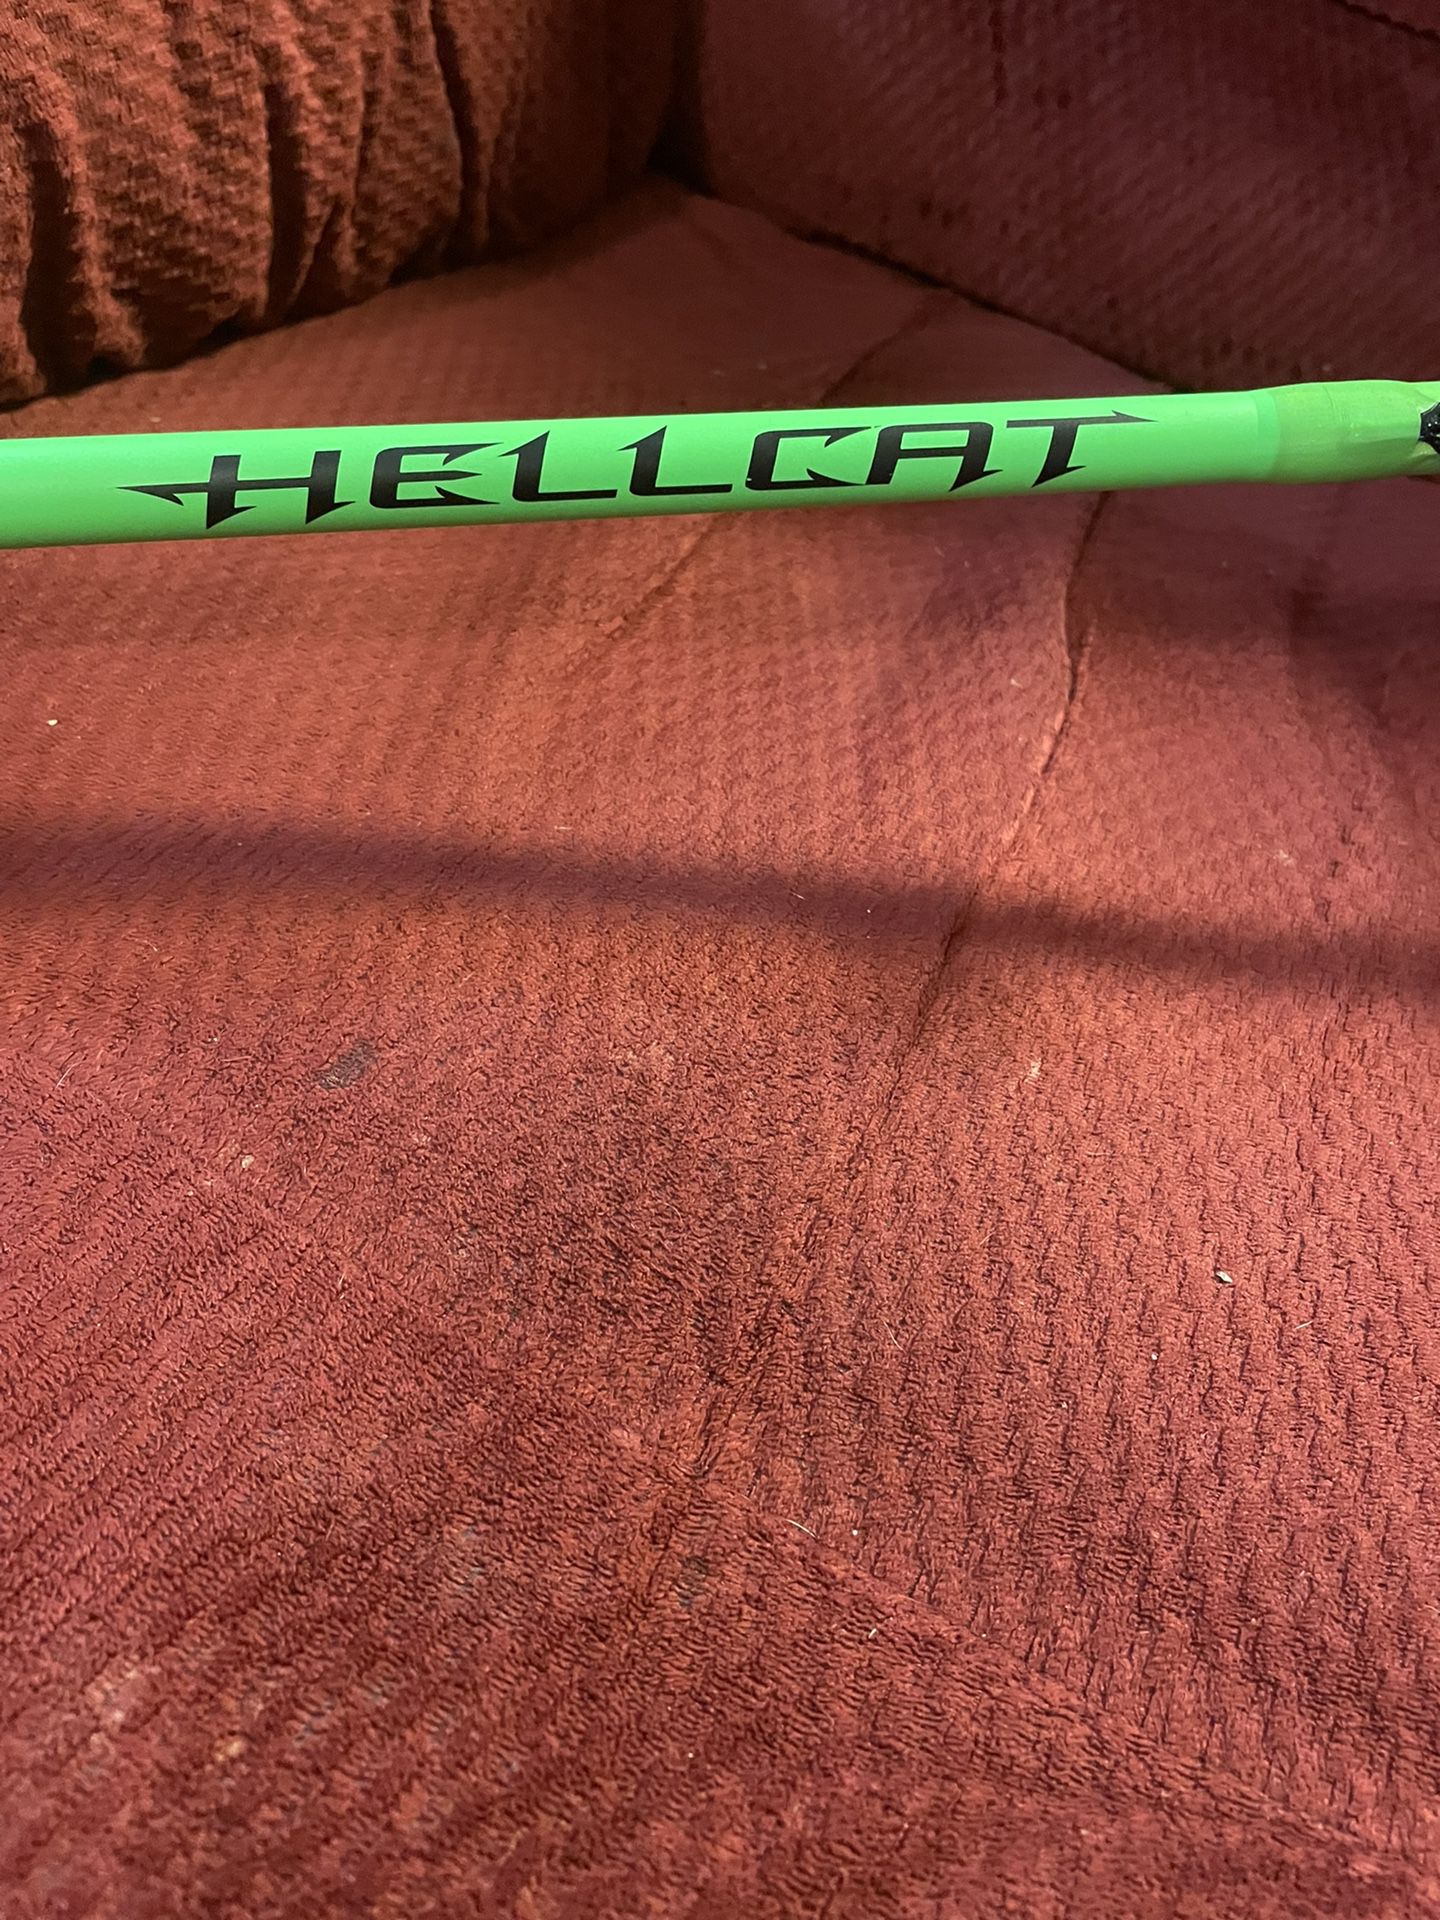 Hellcat Medium Action Fishing Rod Green for Sale in Mount Pleasant, NC -  OfferUp